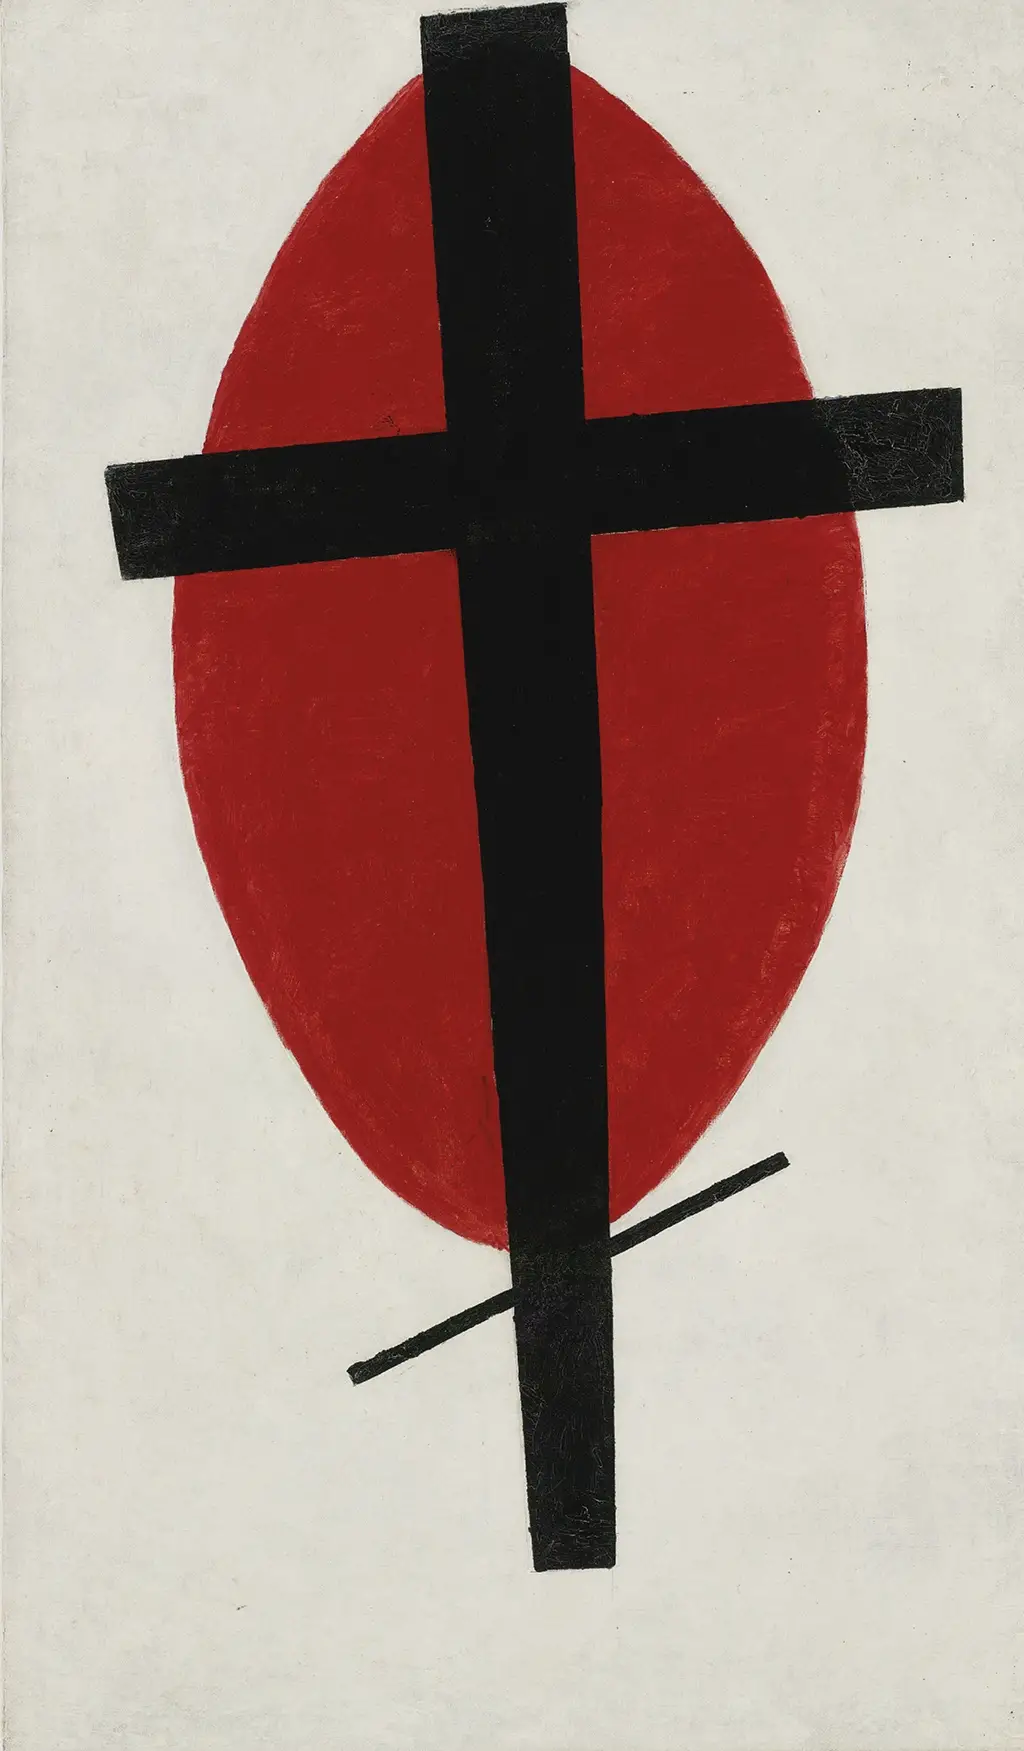 Mystic Suprematism (Black Cross on Red Oval) in Detail Kazimir Malevich